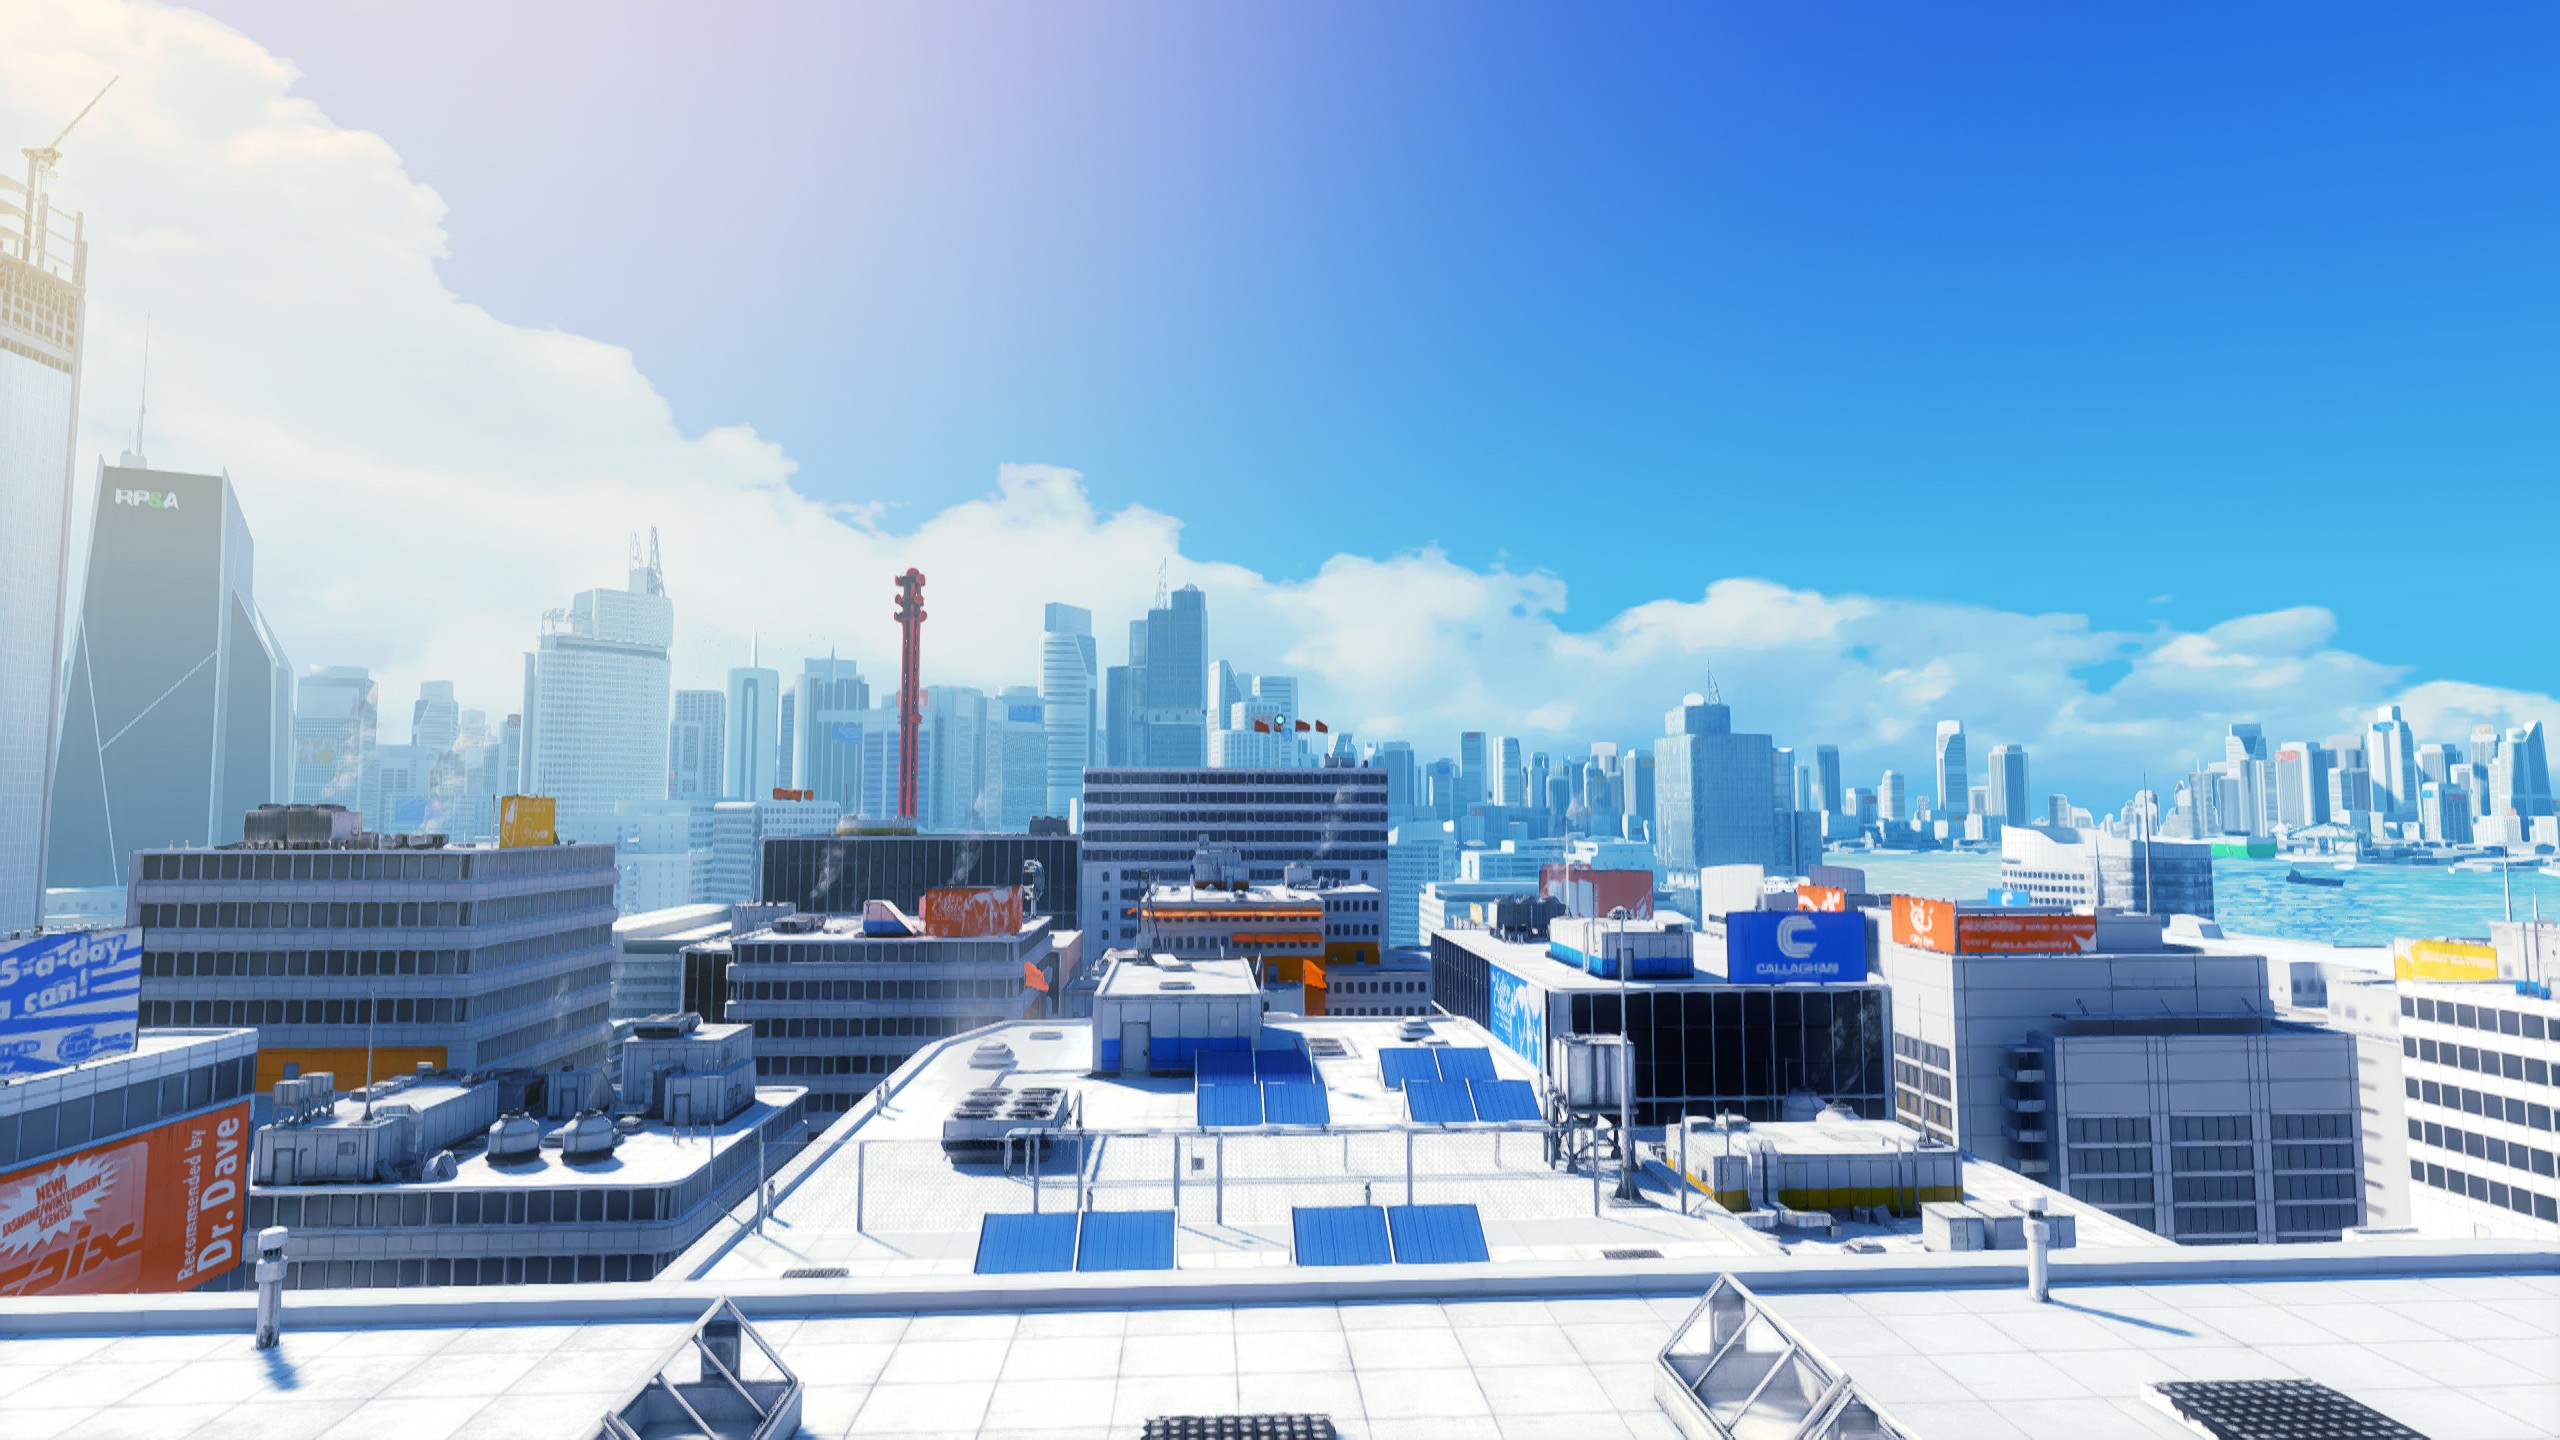 Mirror’s Edge with 2x1 resolution scale, 2x MSAA, extreme quality FXAA, 2560x720 upscaled to 2560x1440 by FSR